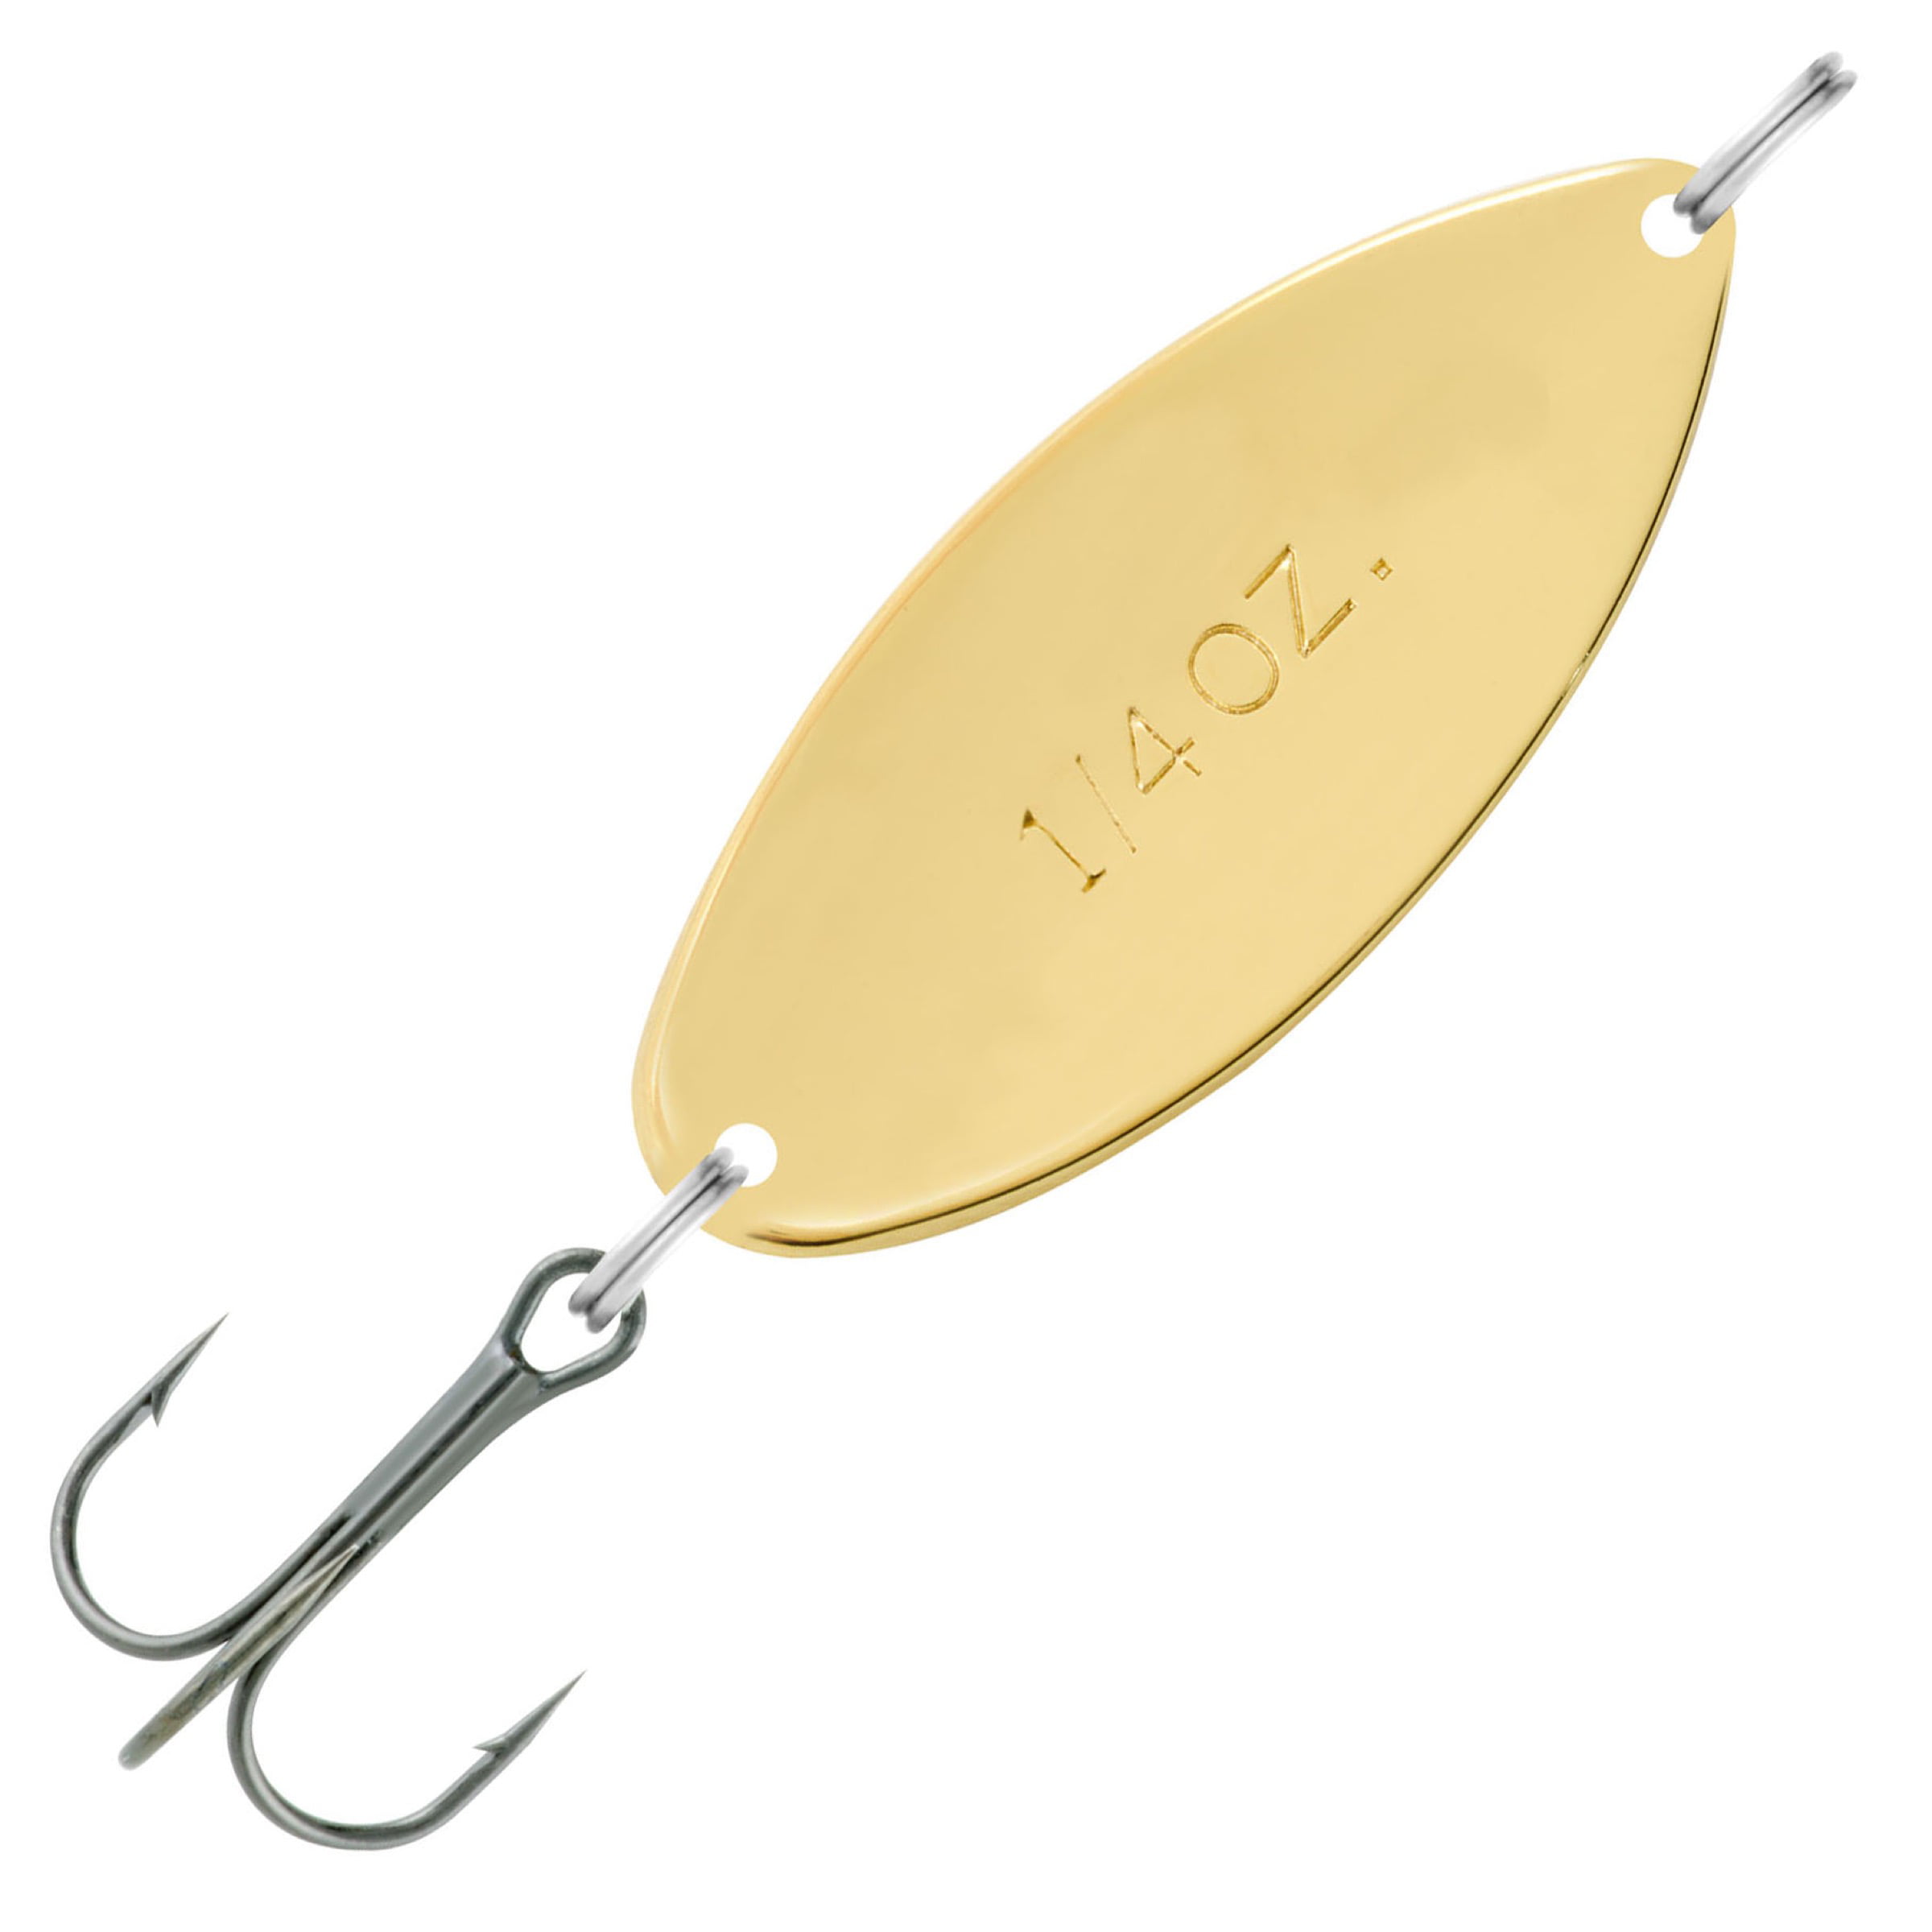 South Bend Kast-A-Way Shud-L-Spoon Freshwater Fishing Lure, Orange Gold,  1/4 Ounce, Fishing Spoons